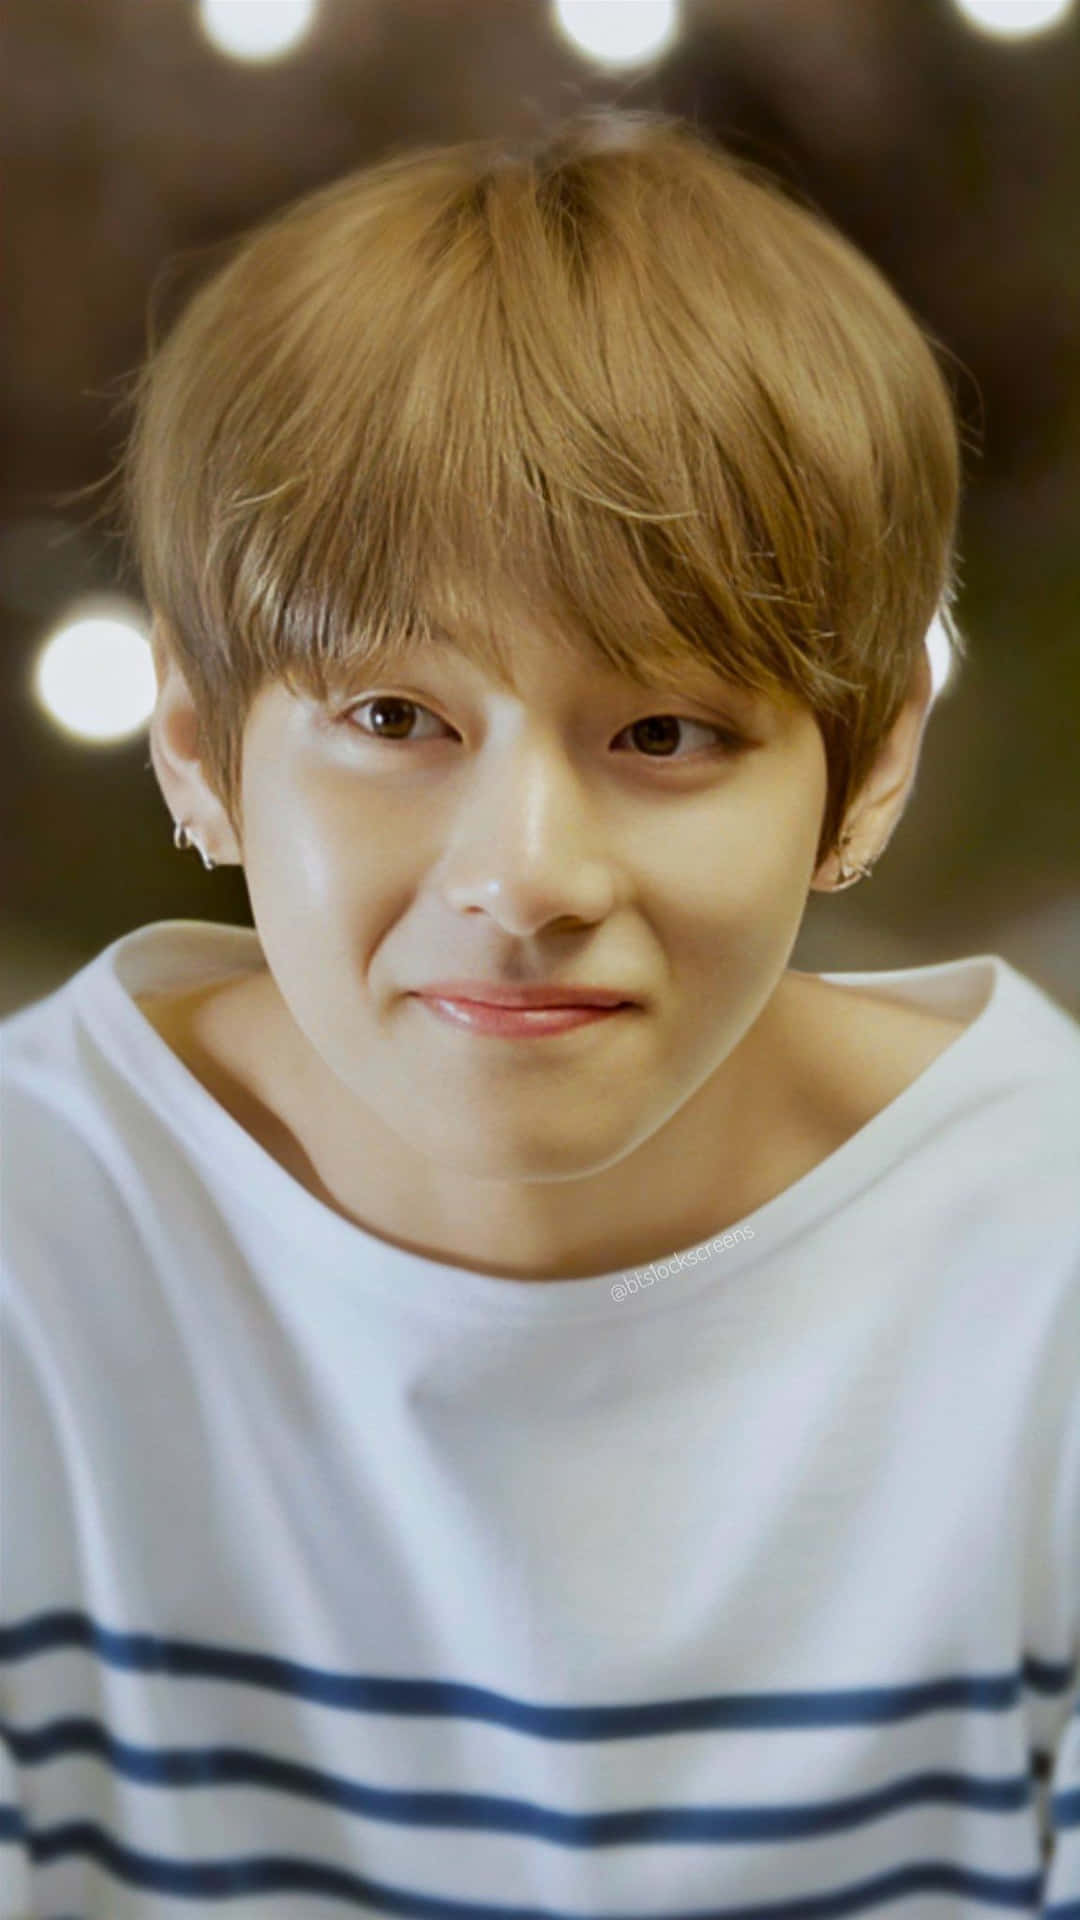 "The Ever Adorable Taehyung"